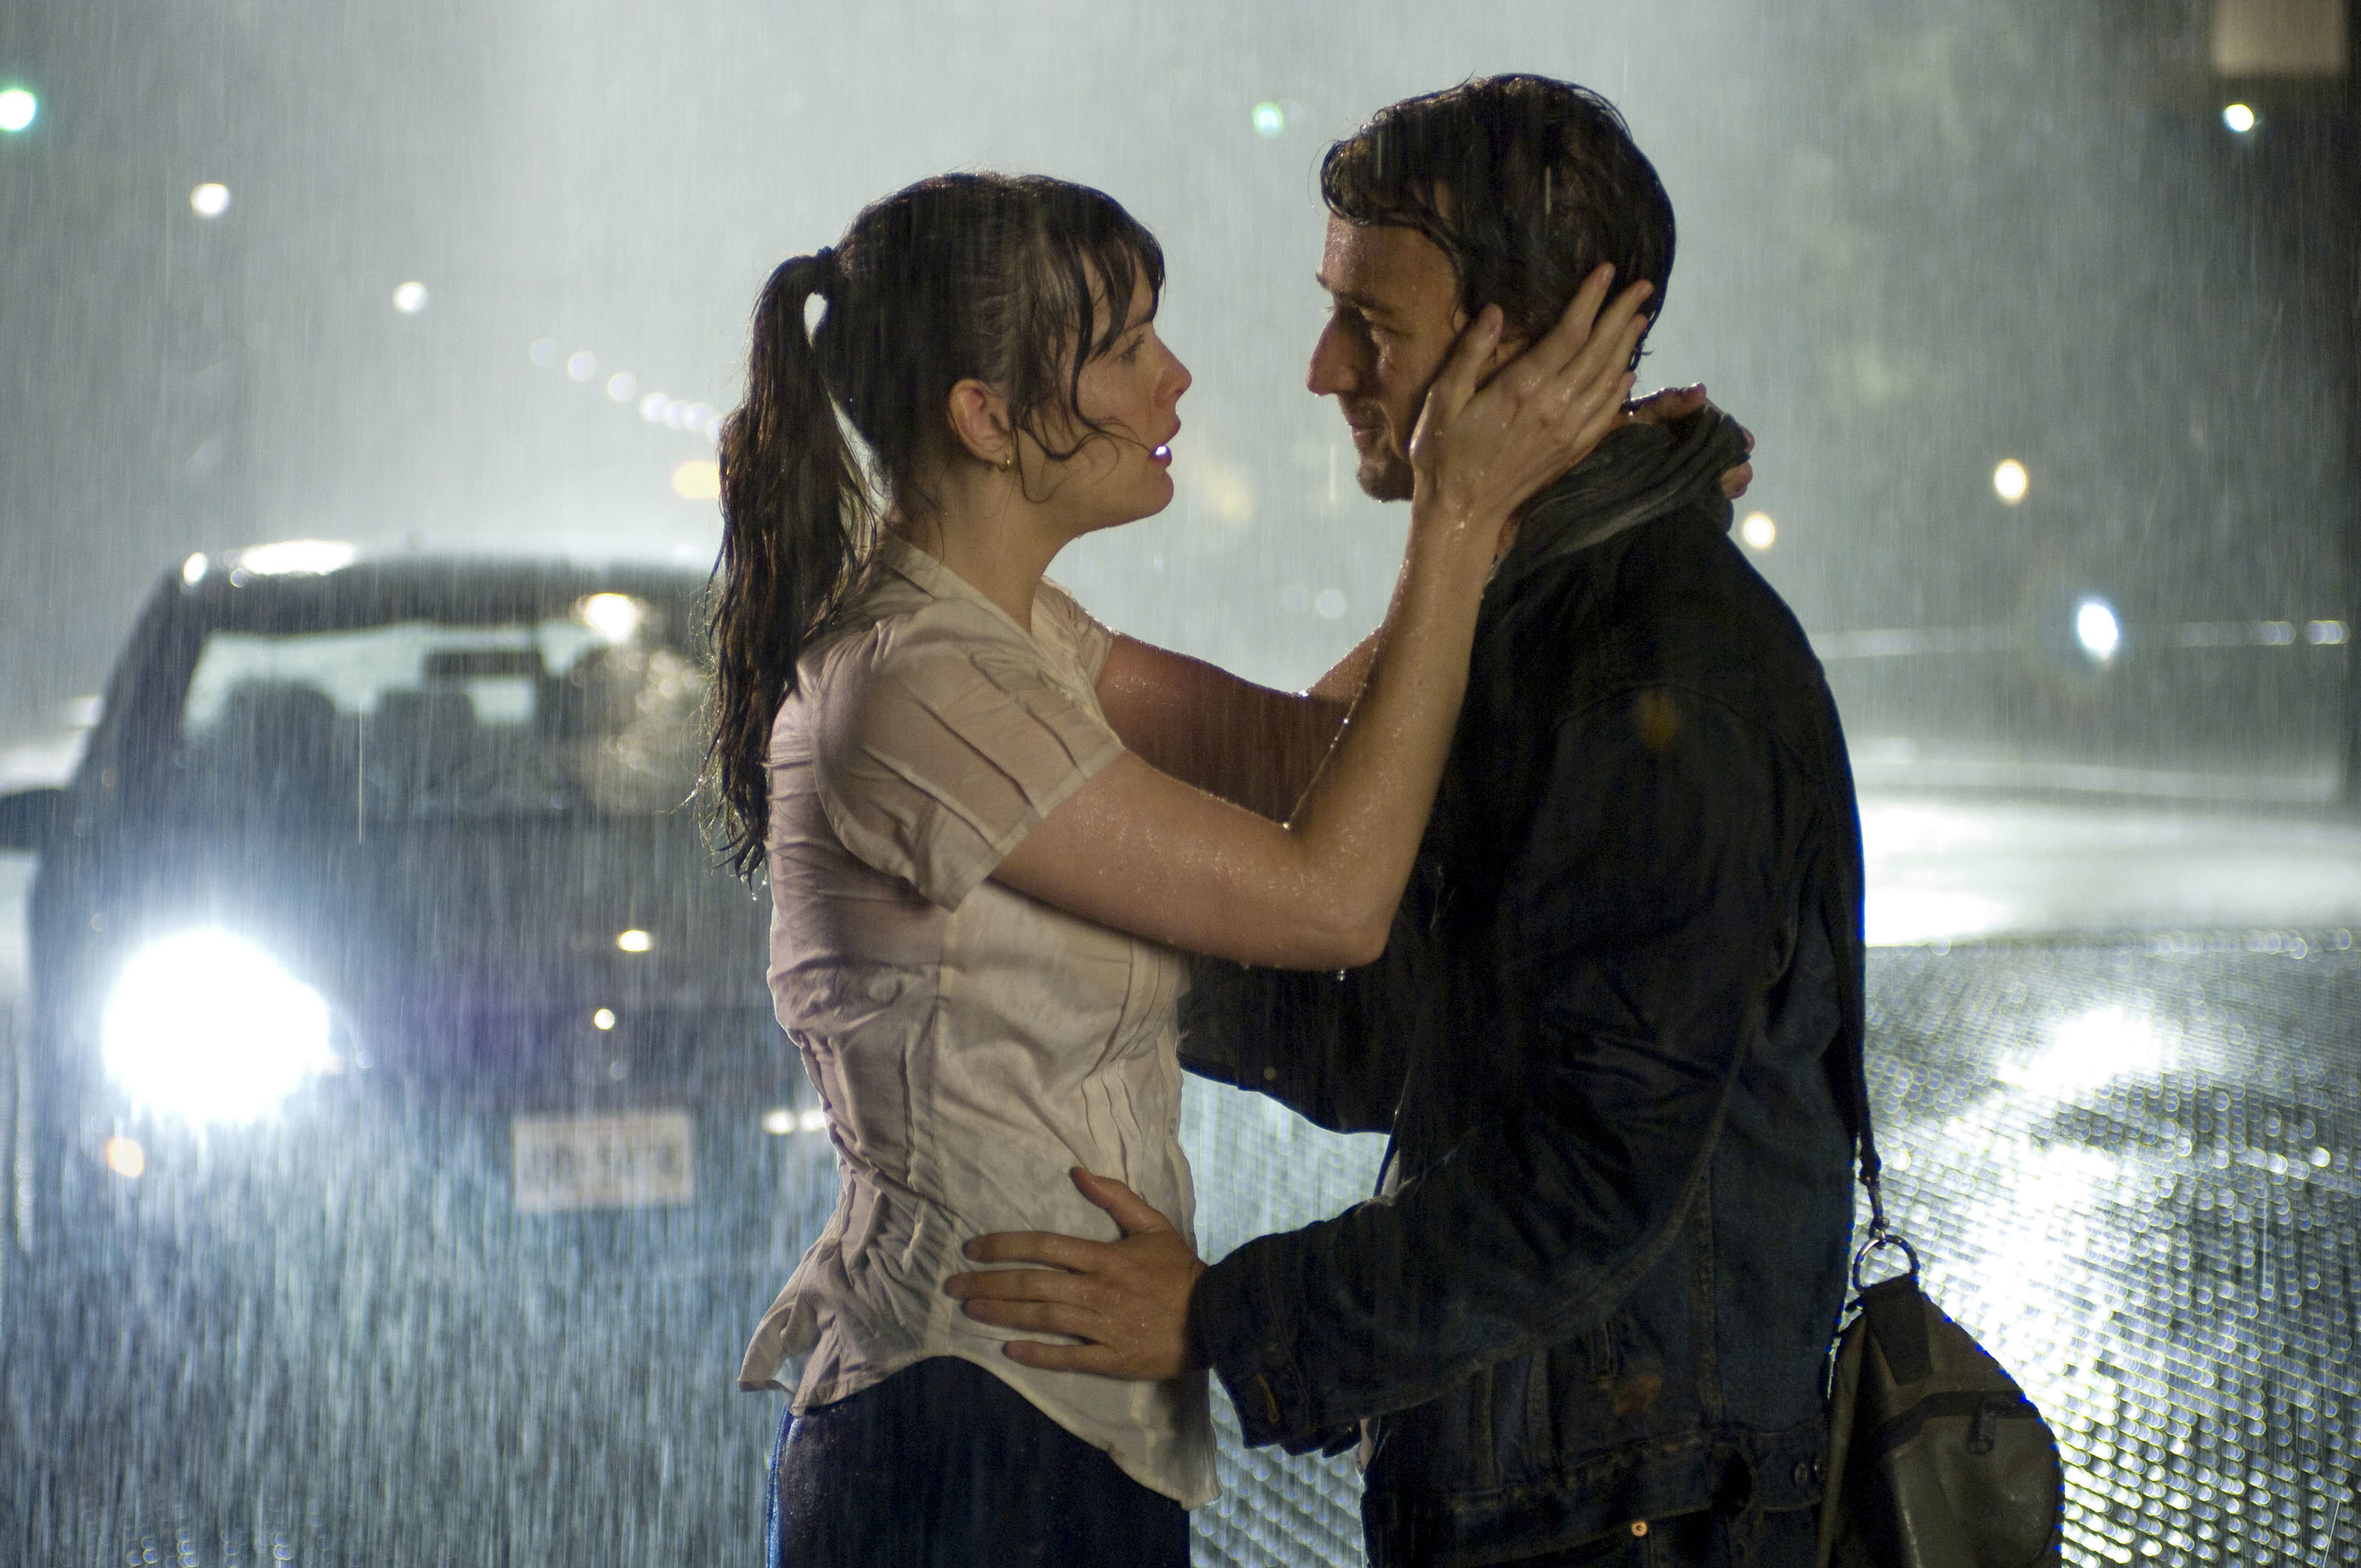 A man and woman standing in the rain holding each other